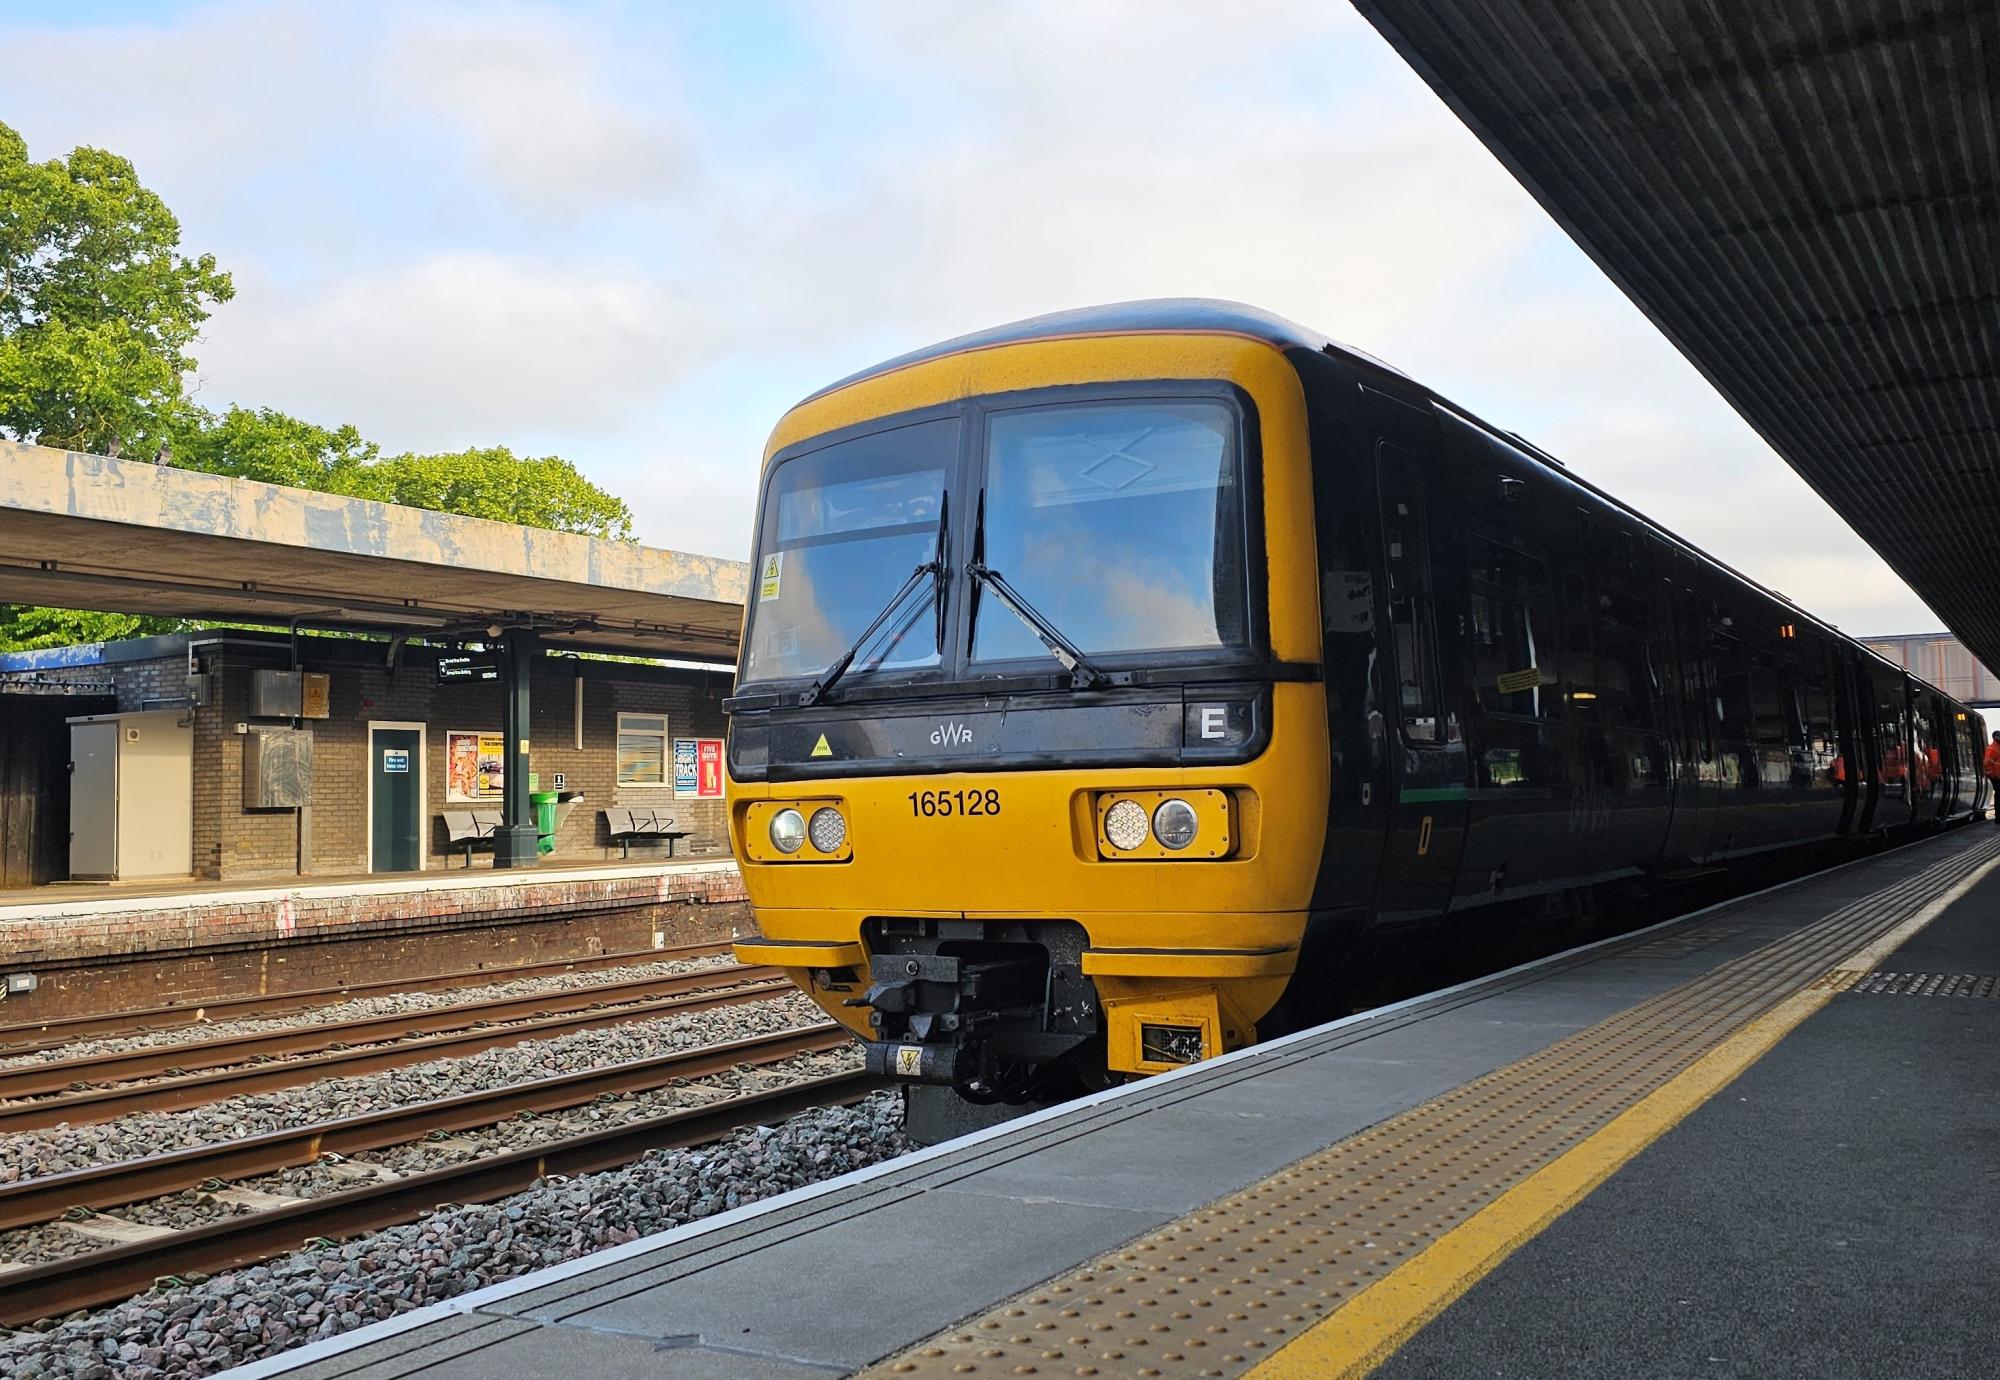 Repairs and upgrades set to take place between Coventry and Oxford